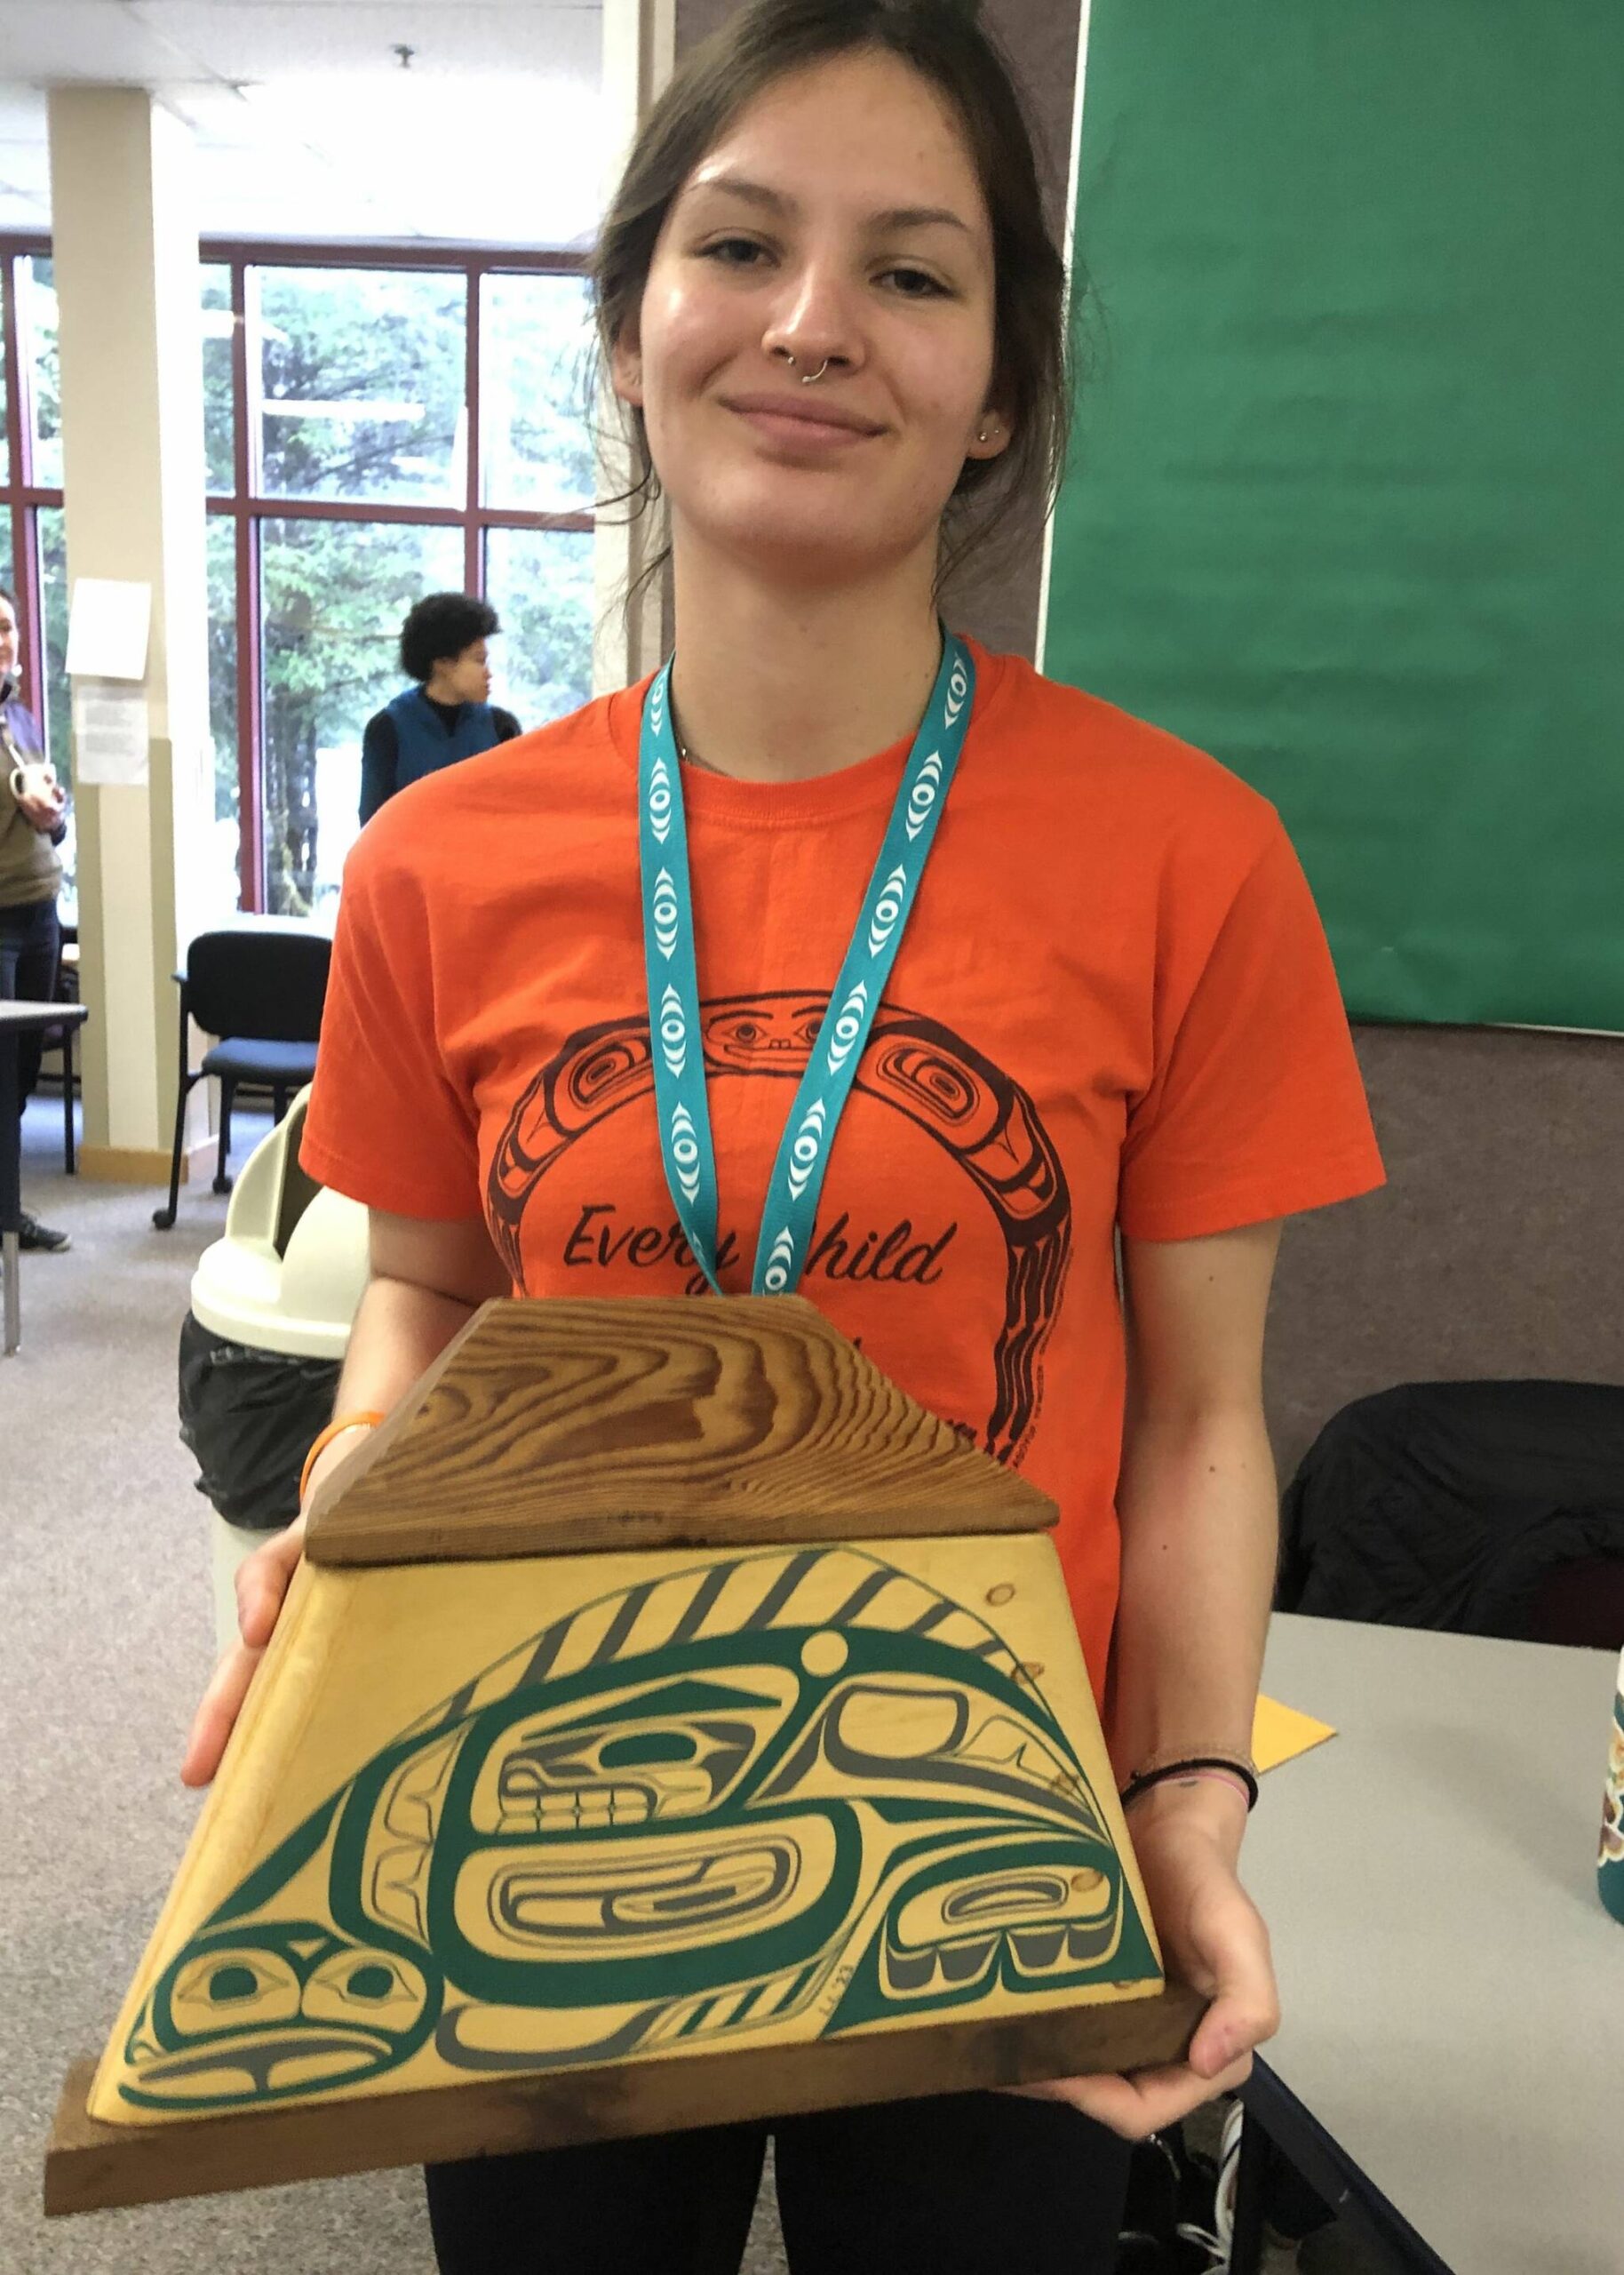 Laci Lowery from Craig holds her prize winning formline box for which she received the Kirk Garbisch Award for Creative Excellence at this year’s Alaska Student Activities Association’s Region V Art Fest in Yakutat. She took the same award last year in Klawock for a woodcarved formline beaver bowl. (Courtesy Photo / Heather Ridgway)